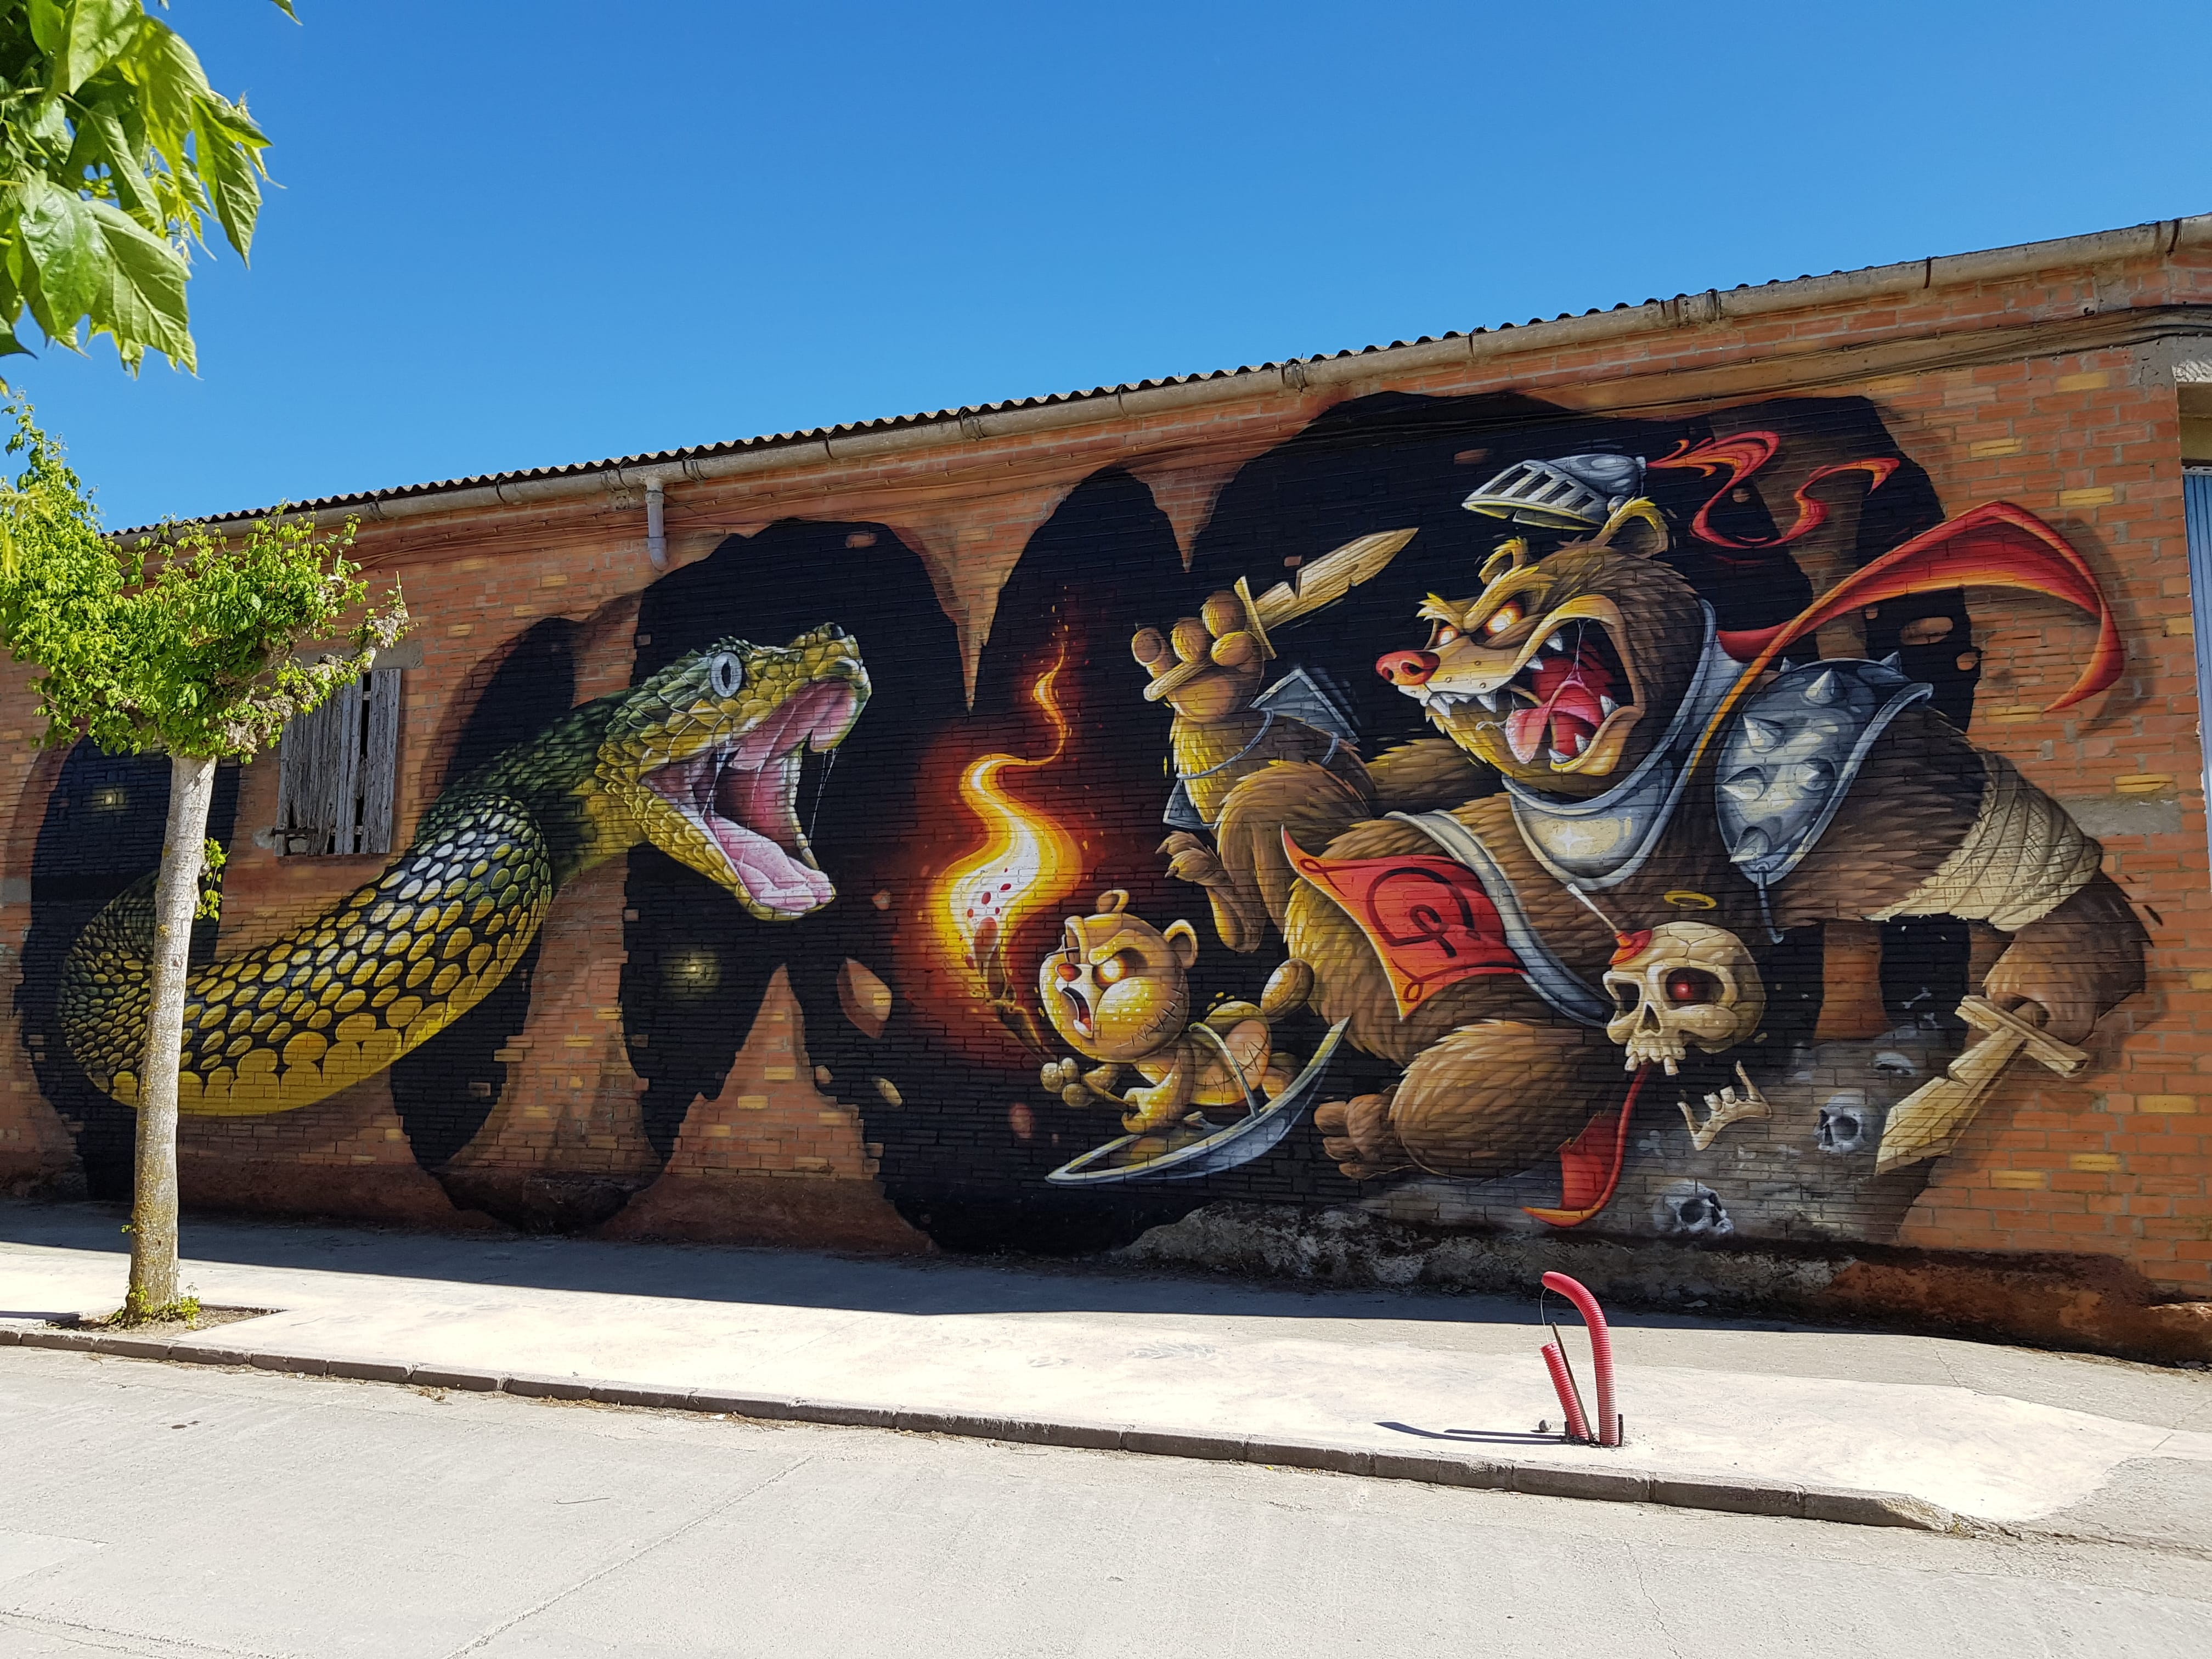 Graffiti 6325  by the artist Scaf captured by Mephisroth in Penelles Spain